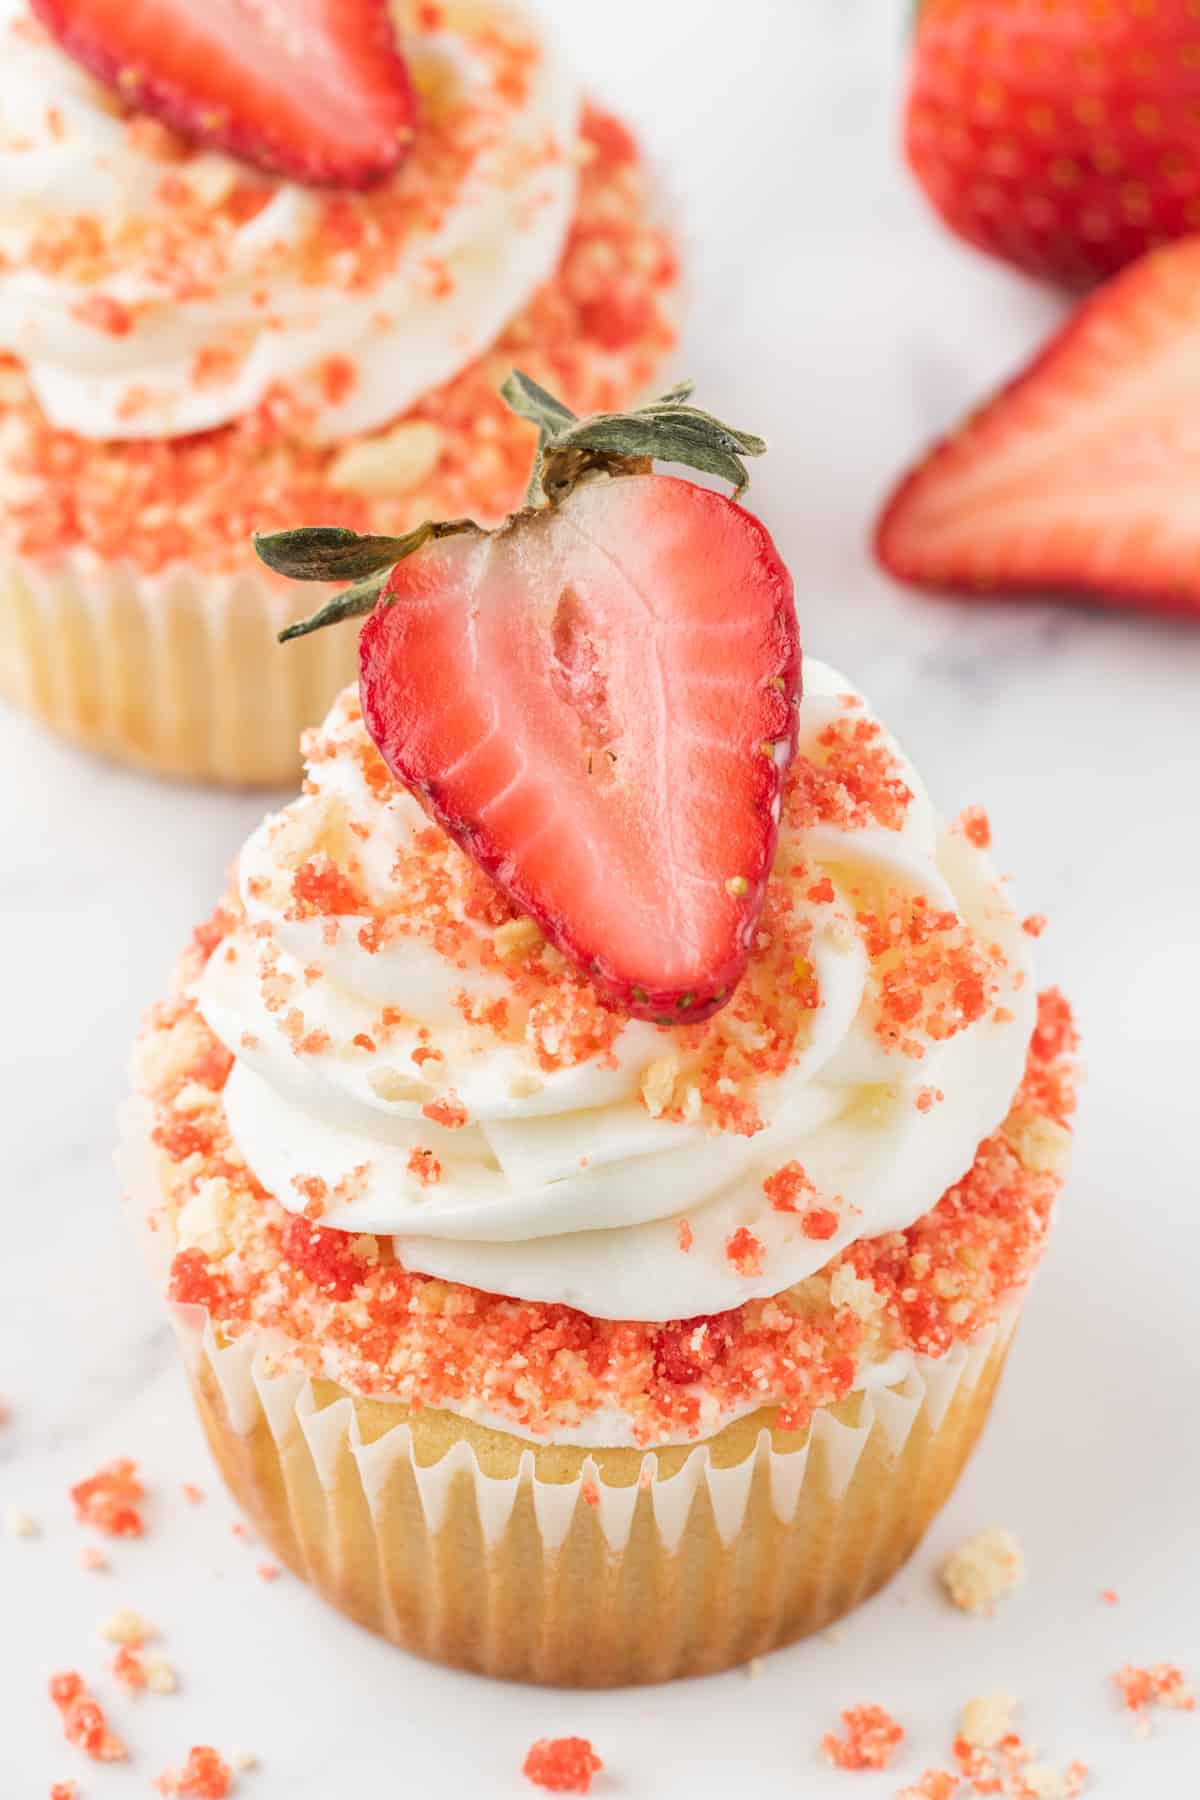 A strawberry crunch cupcake on a white marble background with another cupcake and half strawberry behind it and strawberry crunch topping scattered around the cupcake.